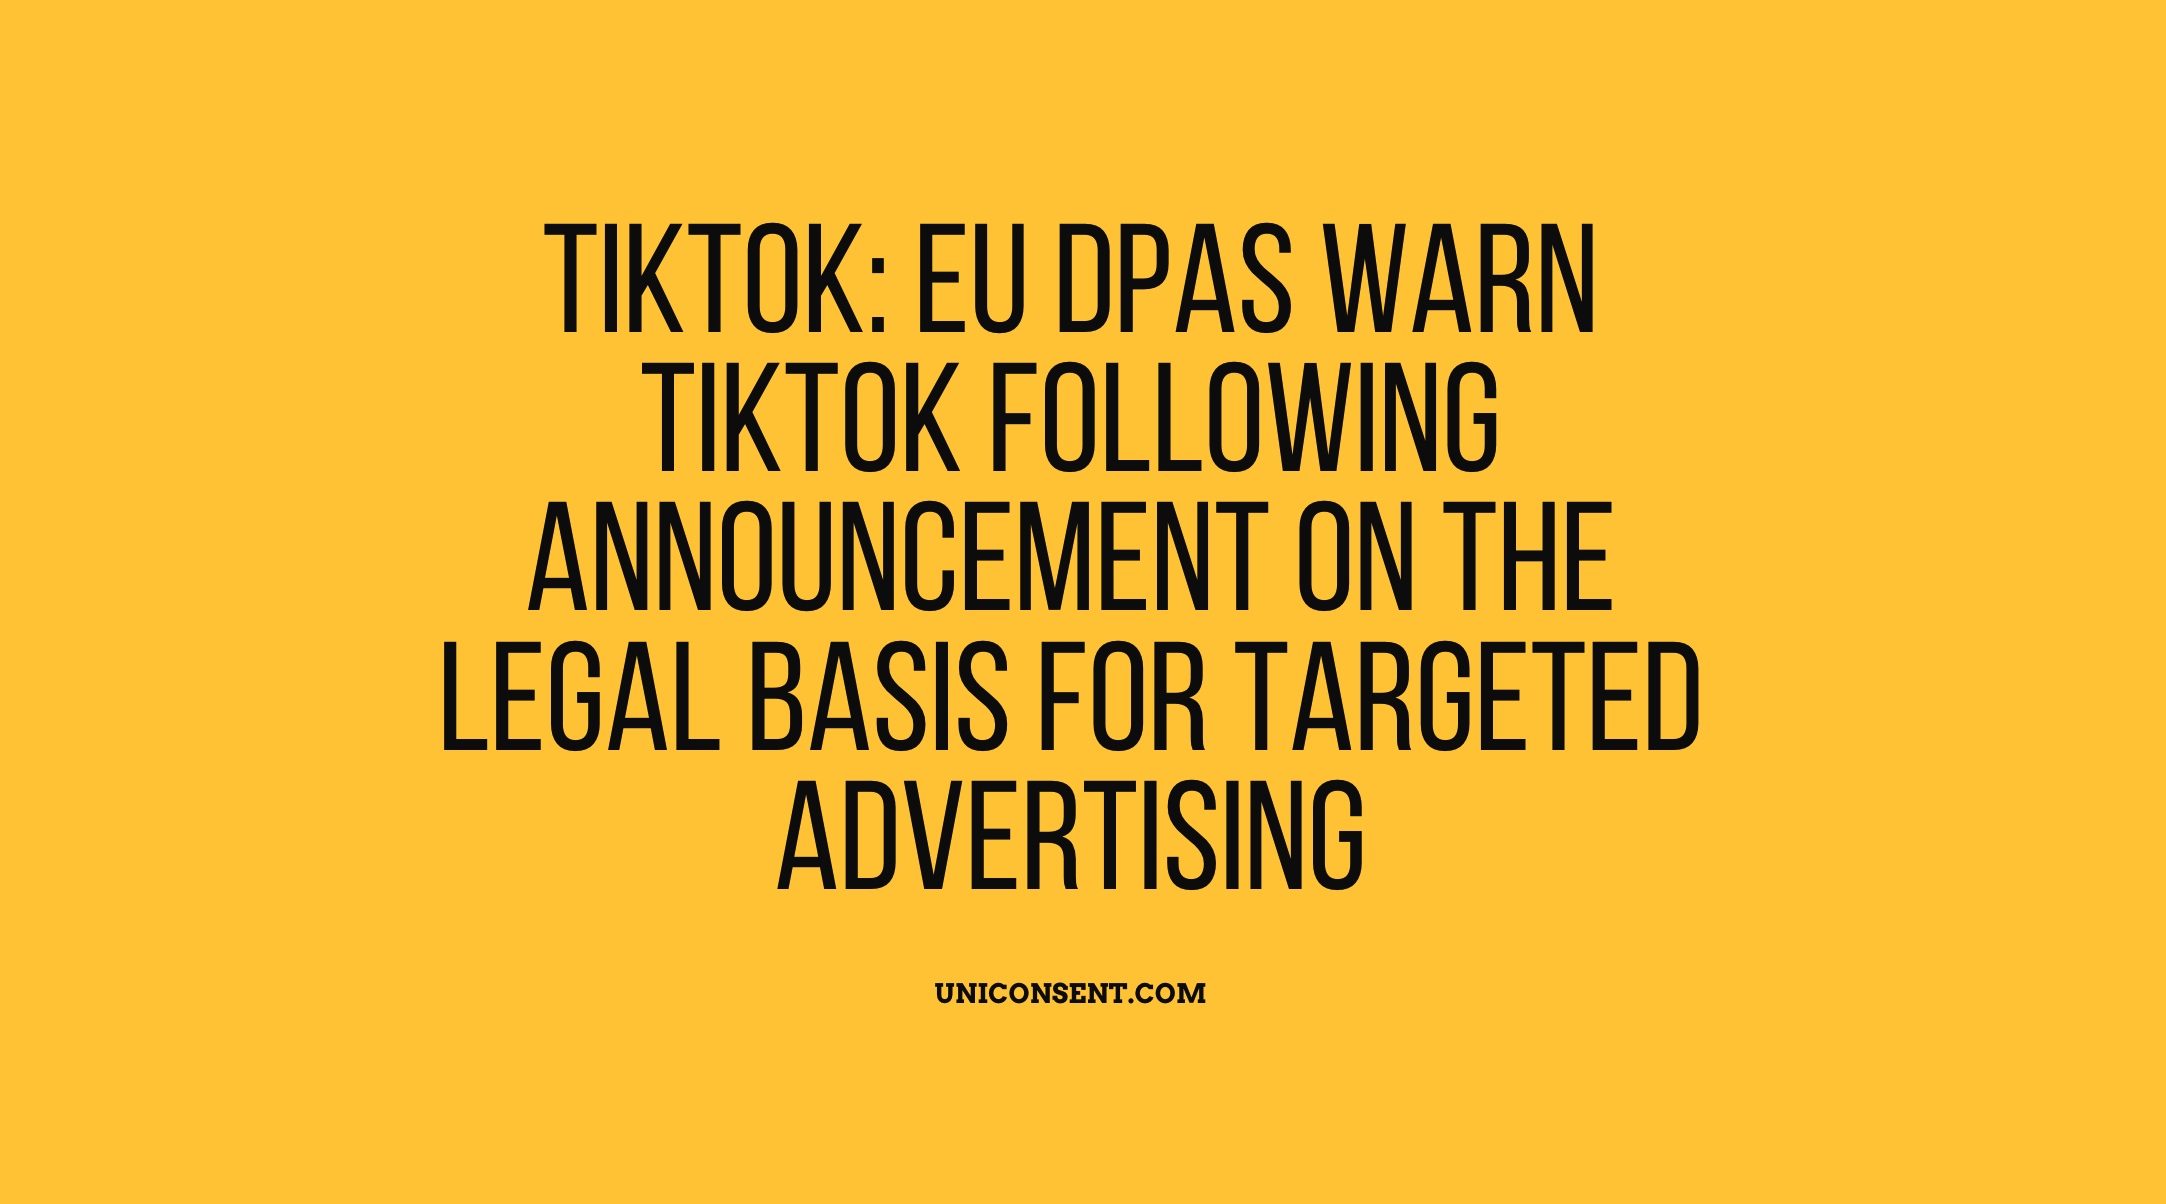 TikTok is facing a fresh round of regulatory complaints in Europe regarding child safety and privacy complaints